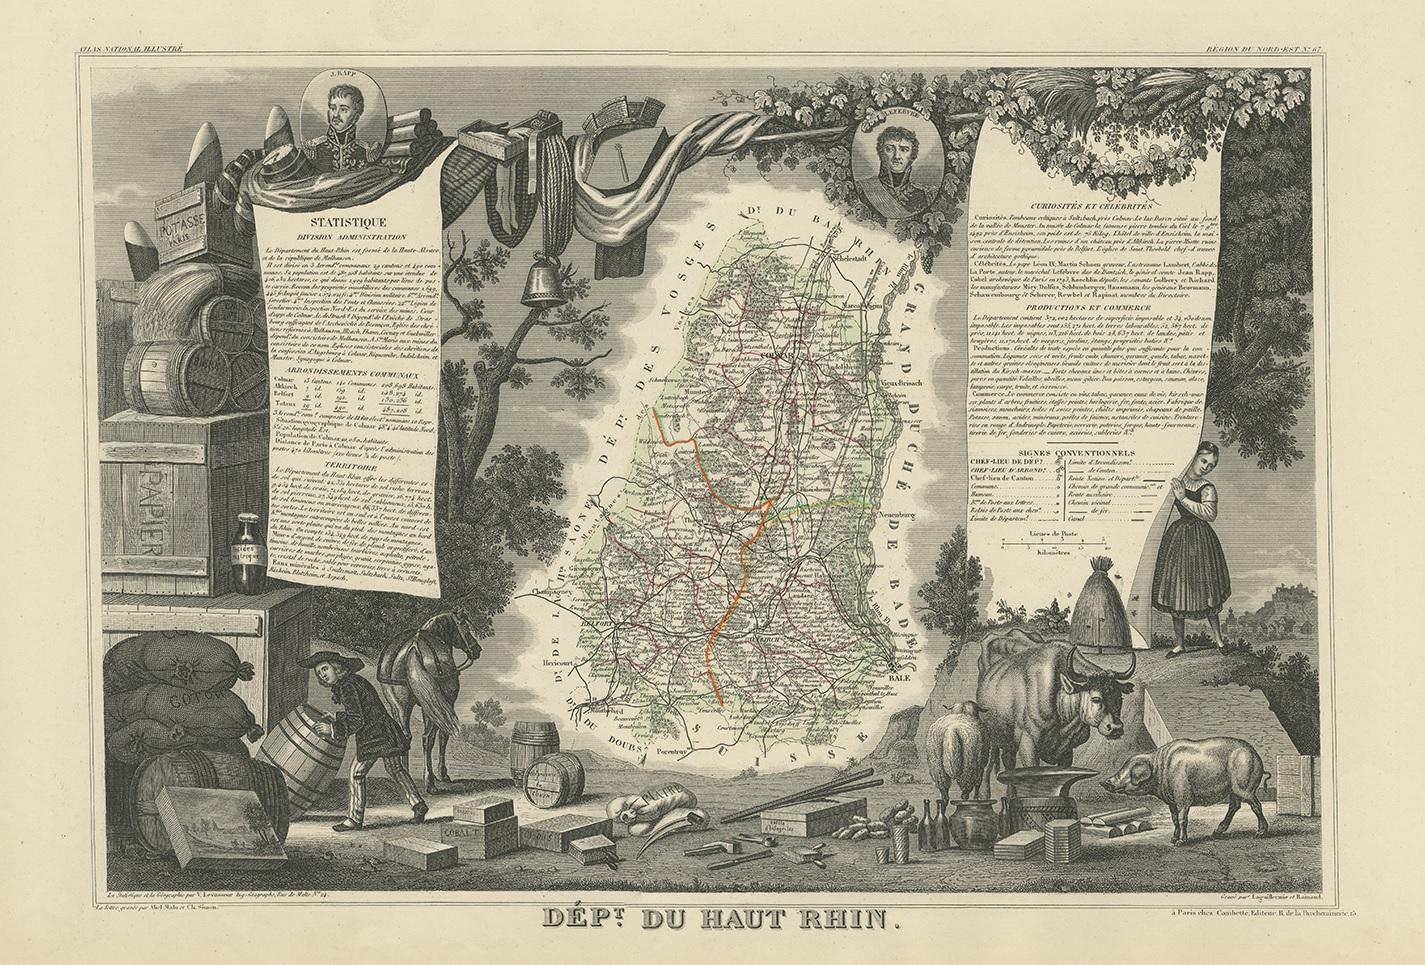 Antique map titled 'Dépt. du Haut Rhin'. Map of the French department of Haut-Rhin, France. This mountainous area is part of the Alsace wine region and is known for its production of both Pinot Noir and Pinot Gris. The map is surrounded by elaborate